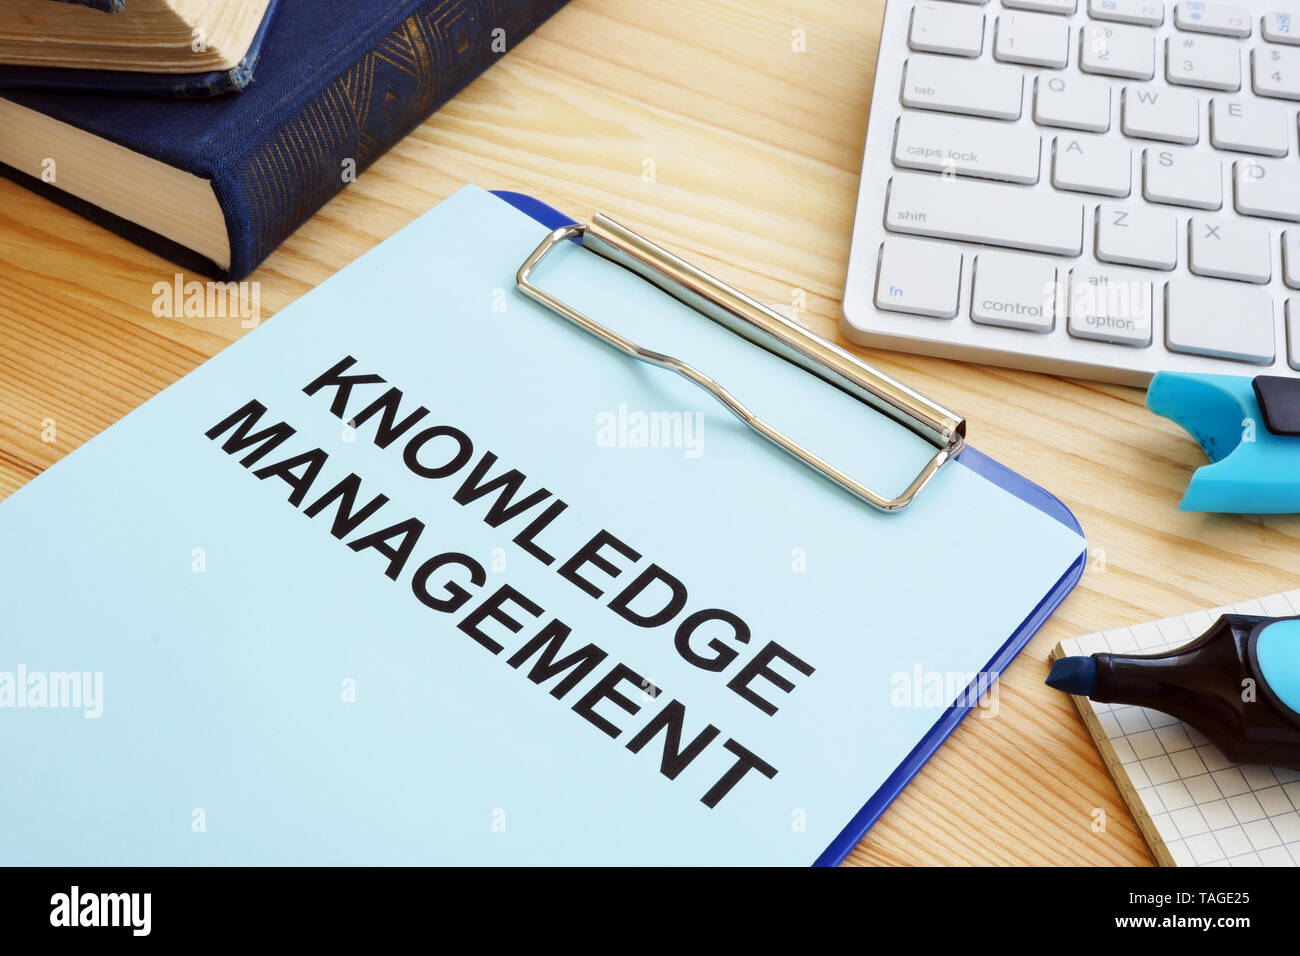 Knowledge management concept. Clipboard and books on table. Stock Photo